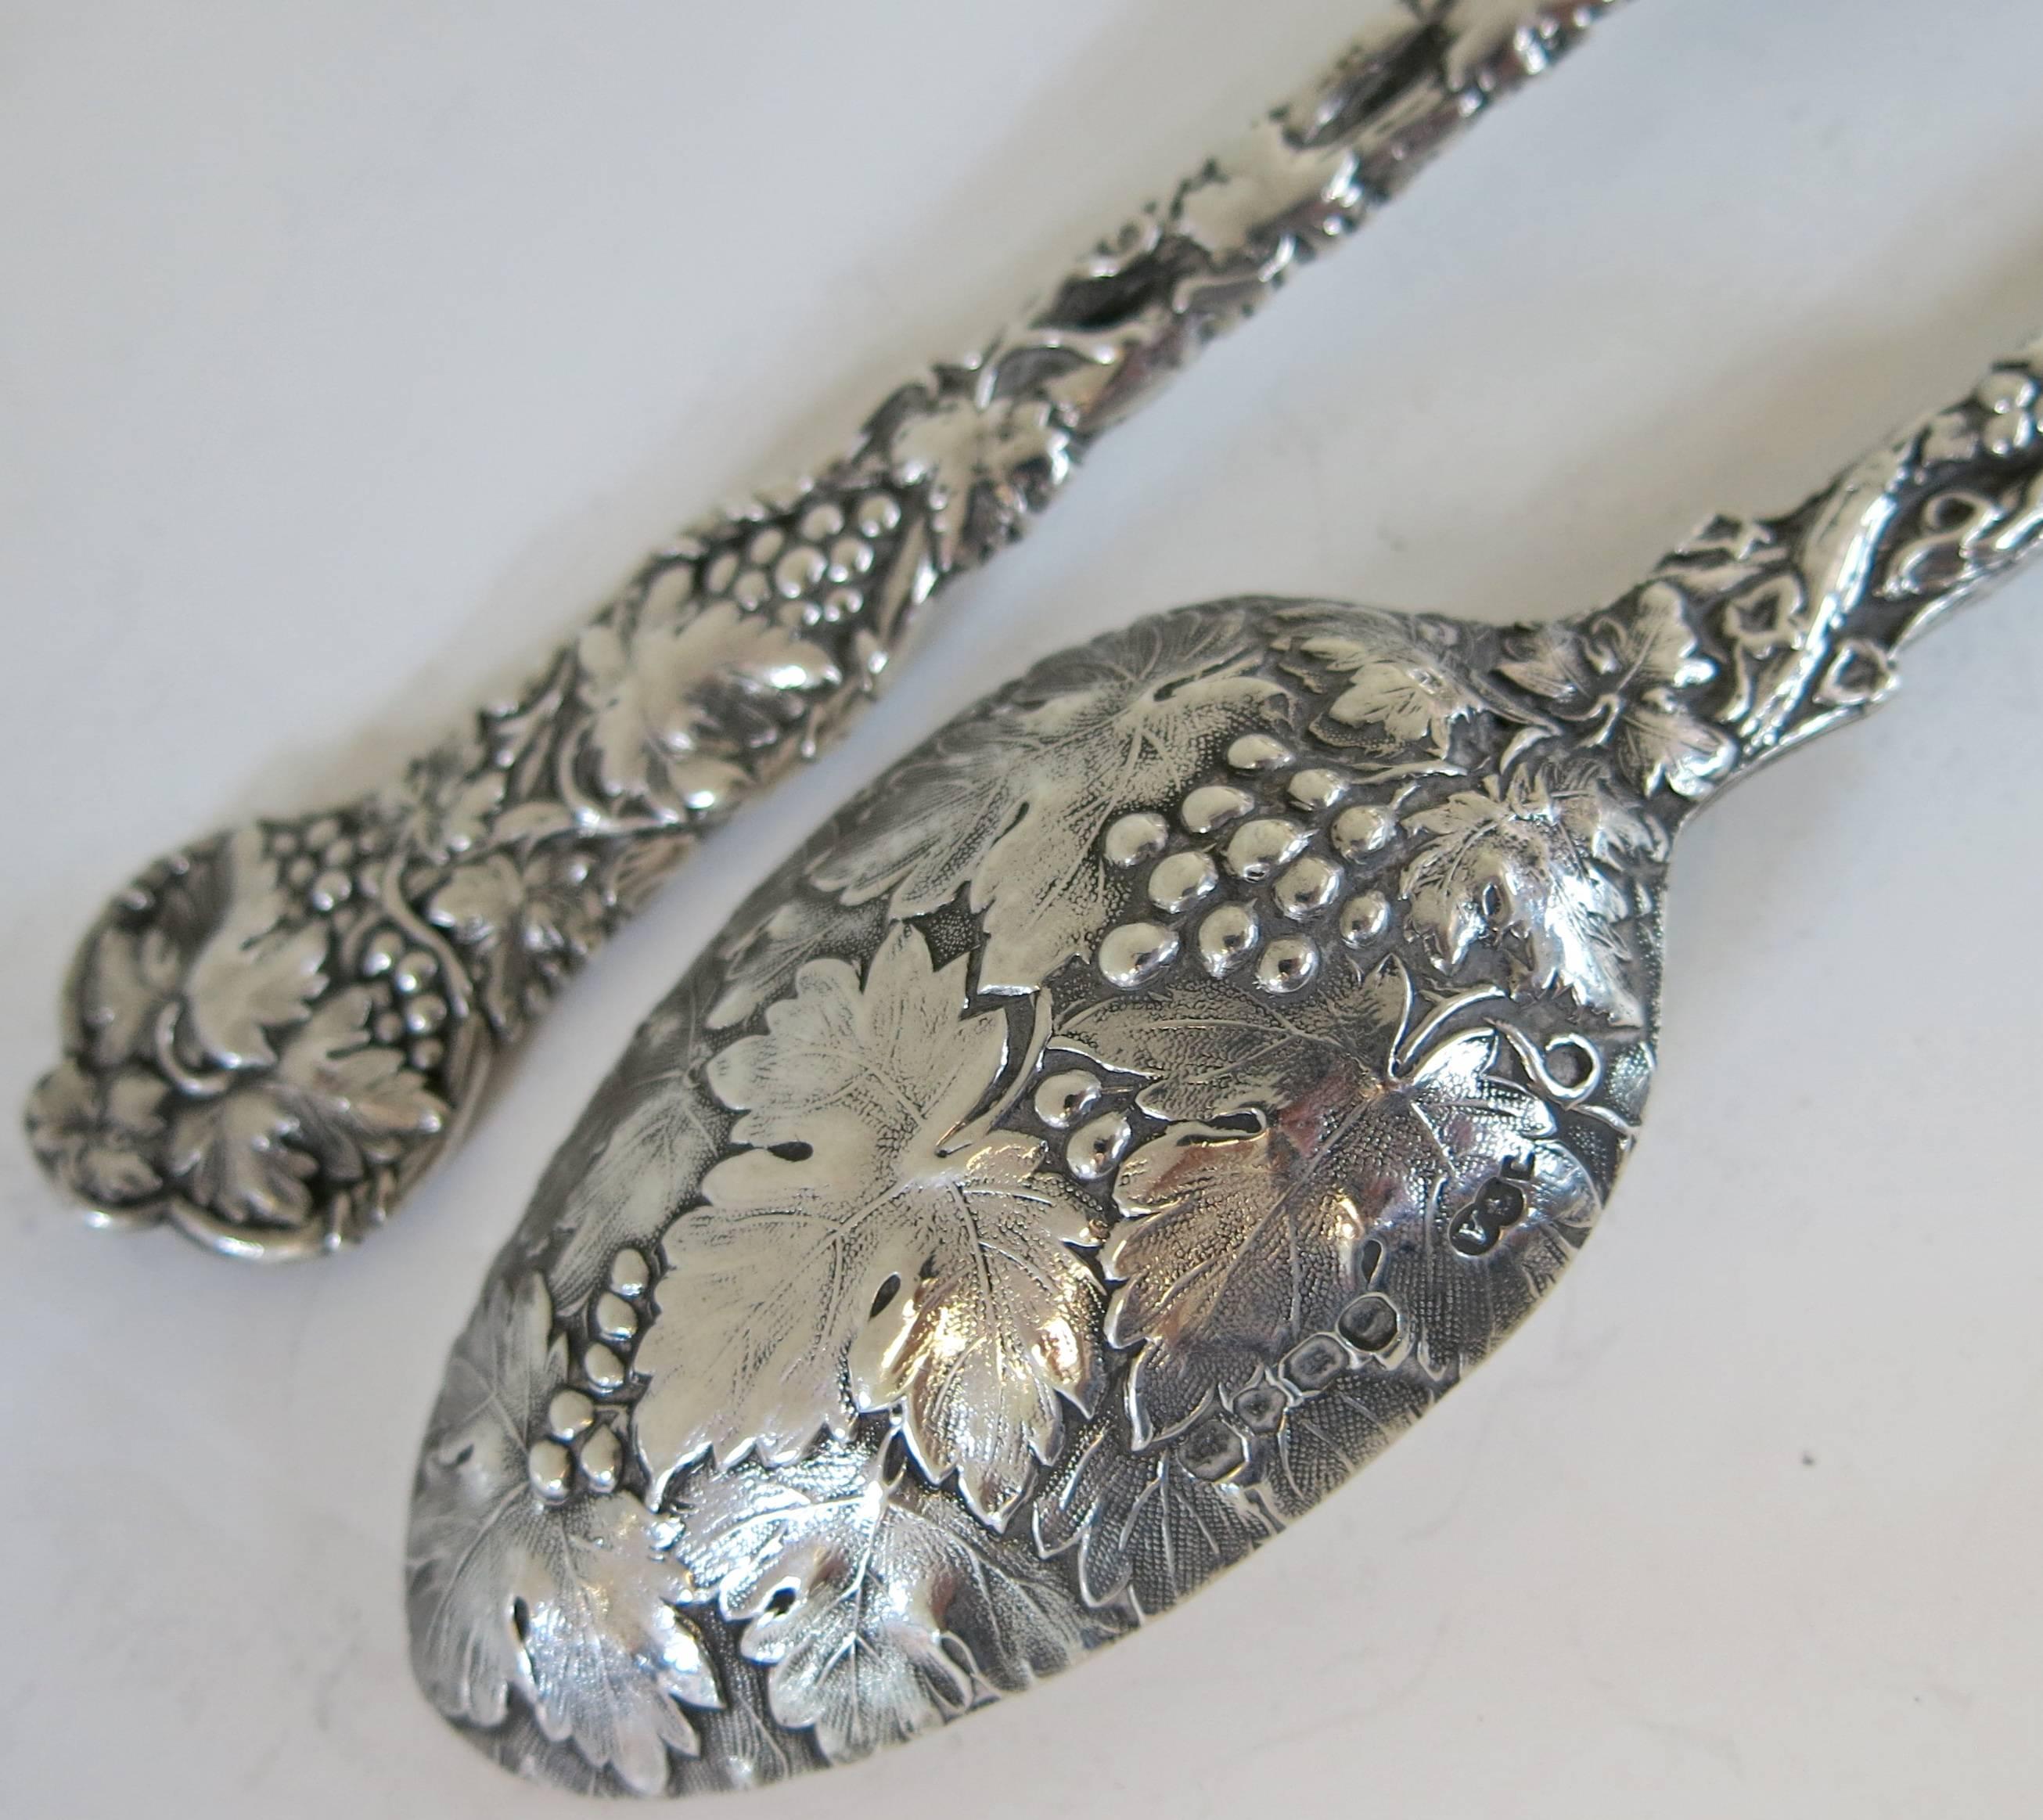 A rare pair of antique Victorian, sterling silver chased vine spoon and fork made by George Adams, London, 1848.
Measure: Spoon is 8 3/4